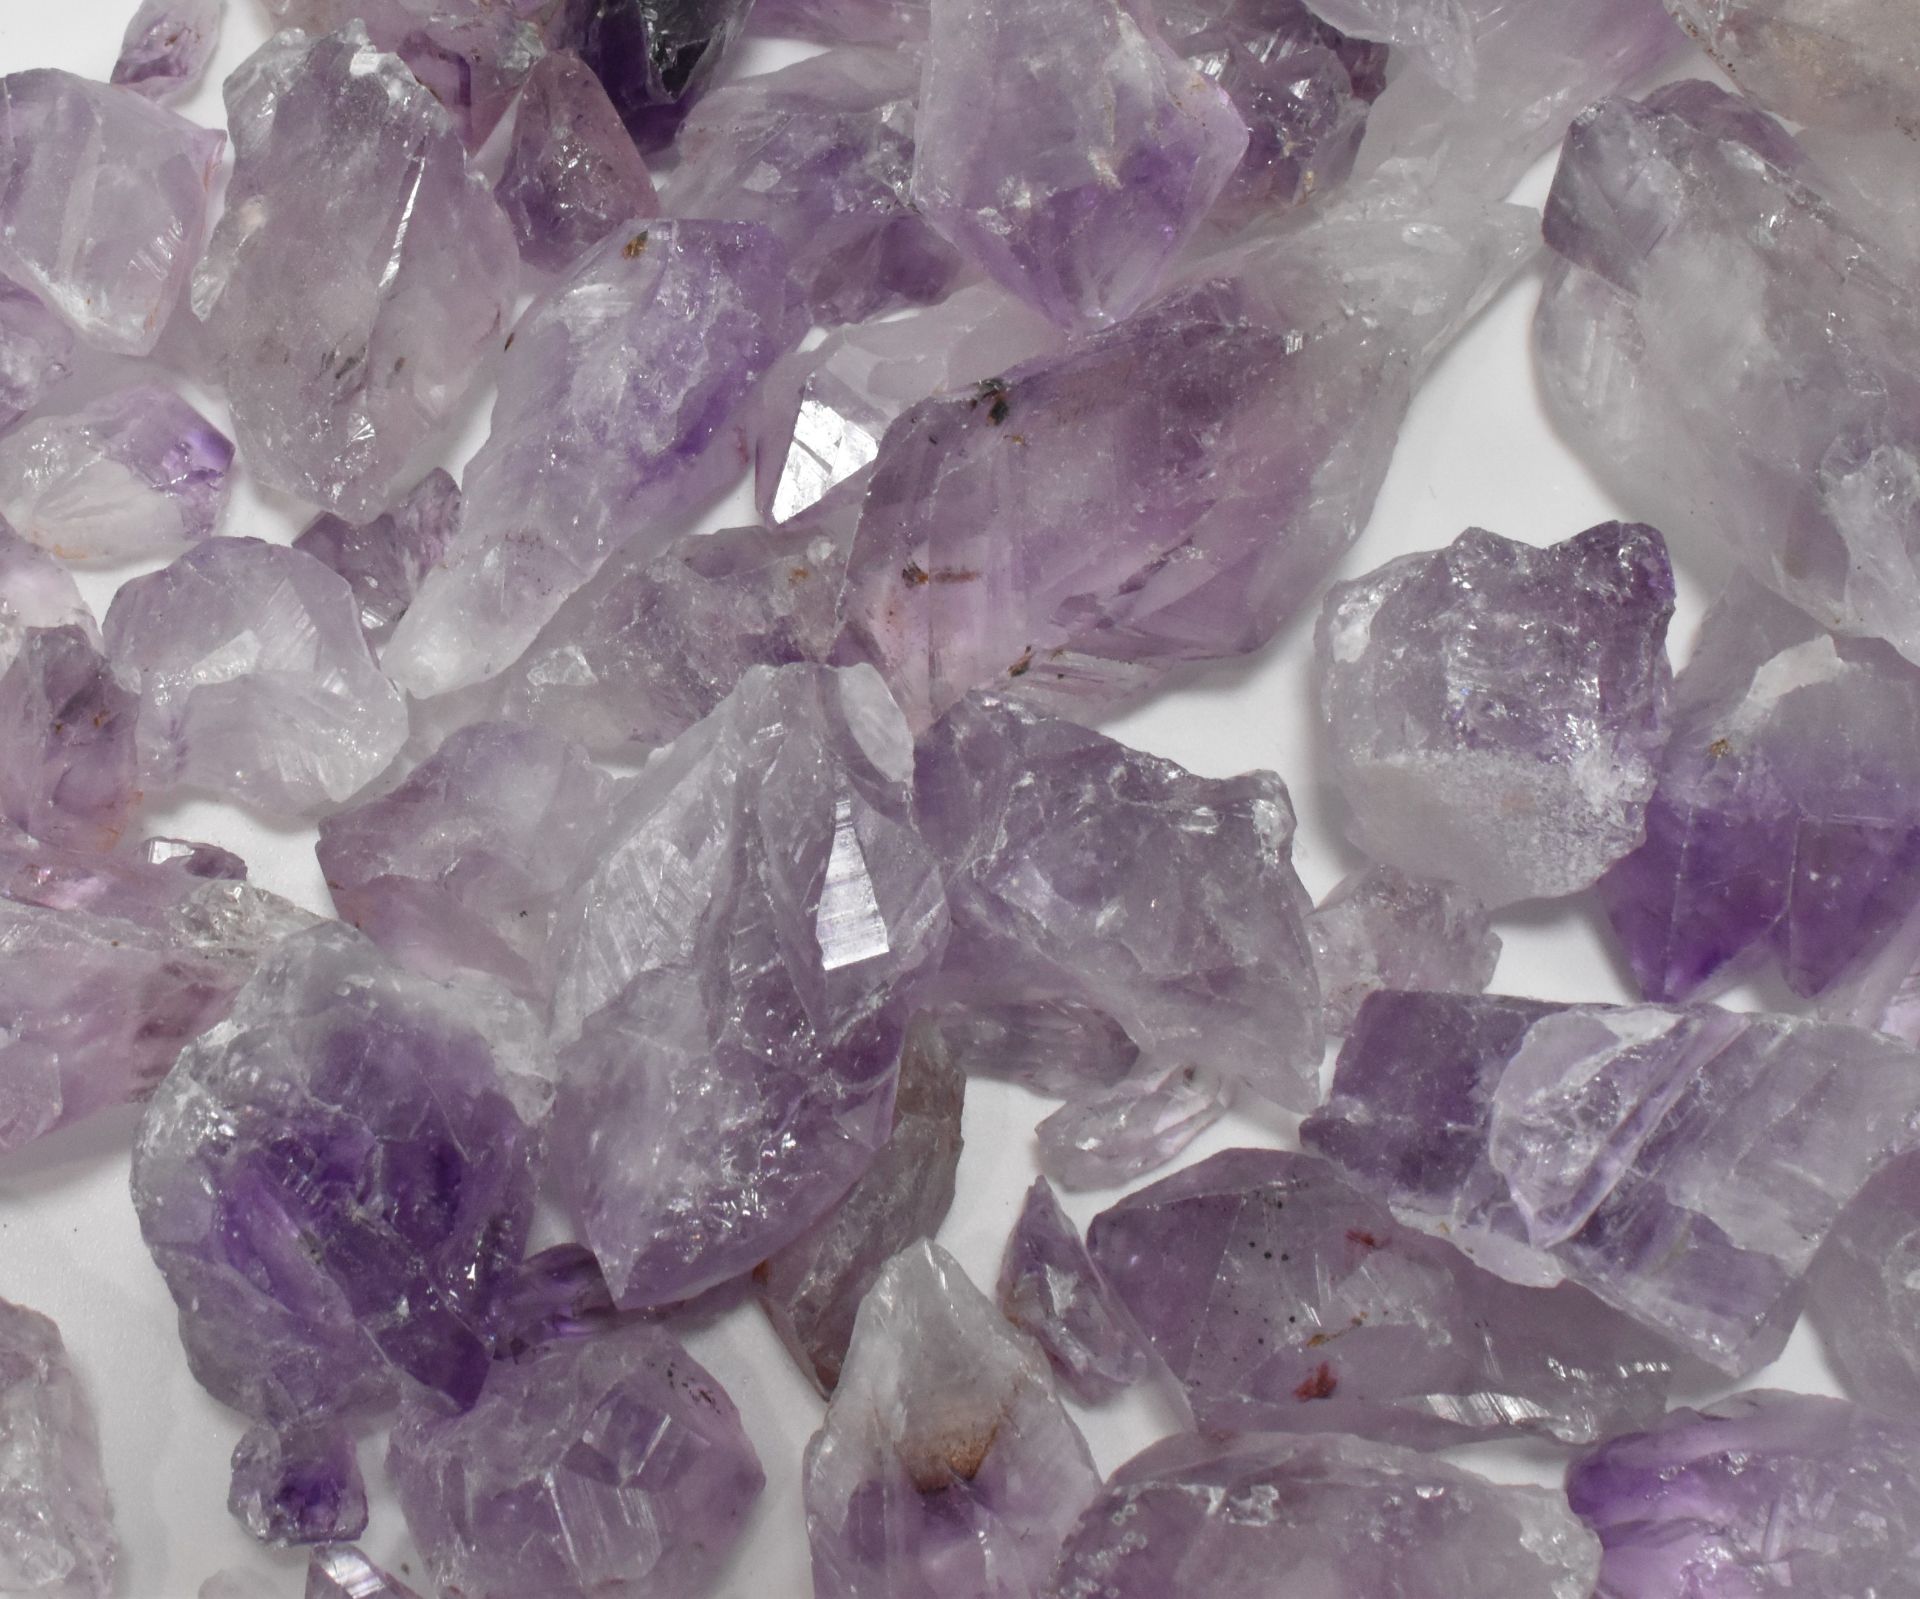 MINERAL SPECIMENS - COLLECTION OF AMETHYST QUARTZ - Image 5 of 5